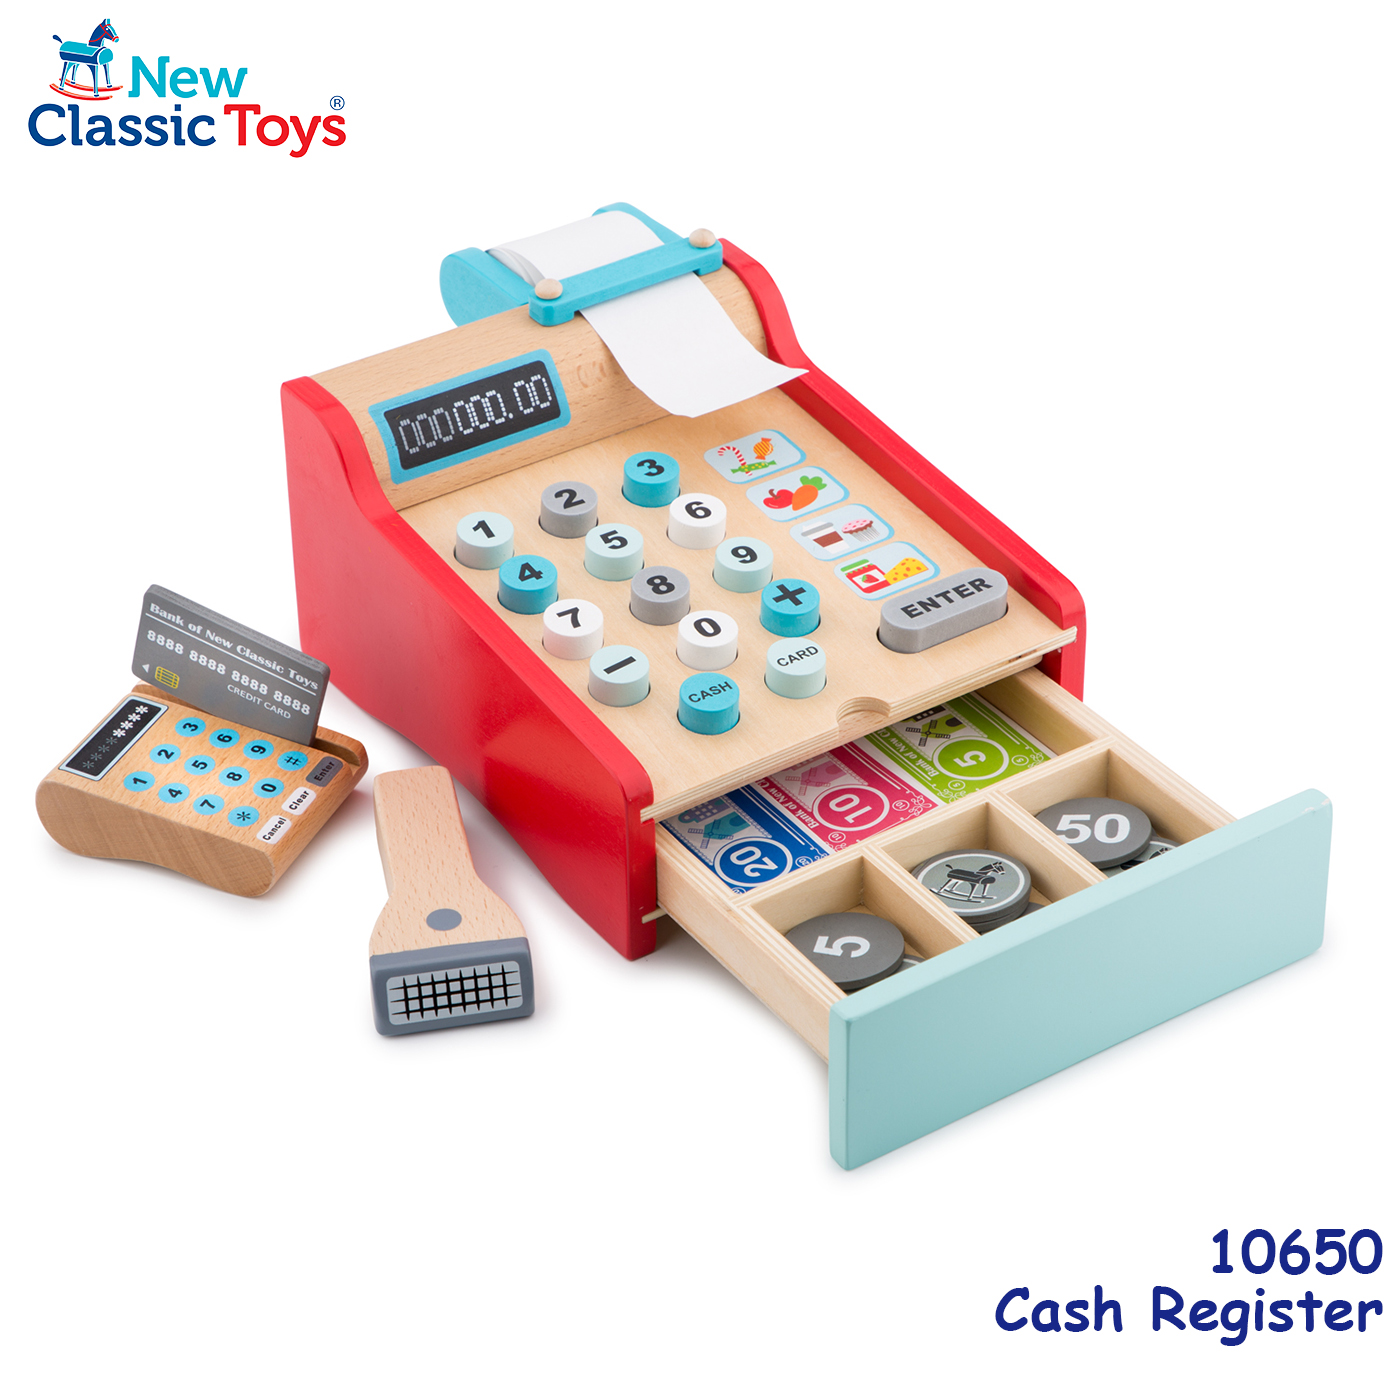 10650_New Classic Toys